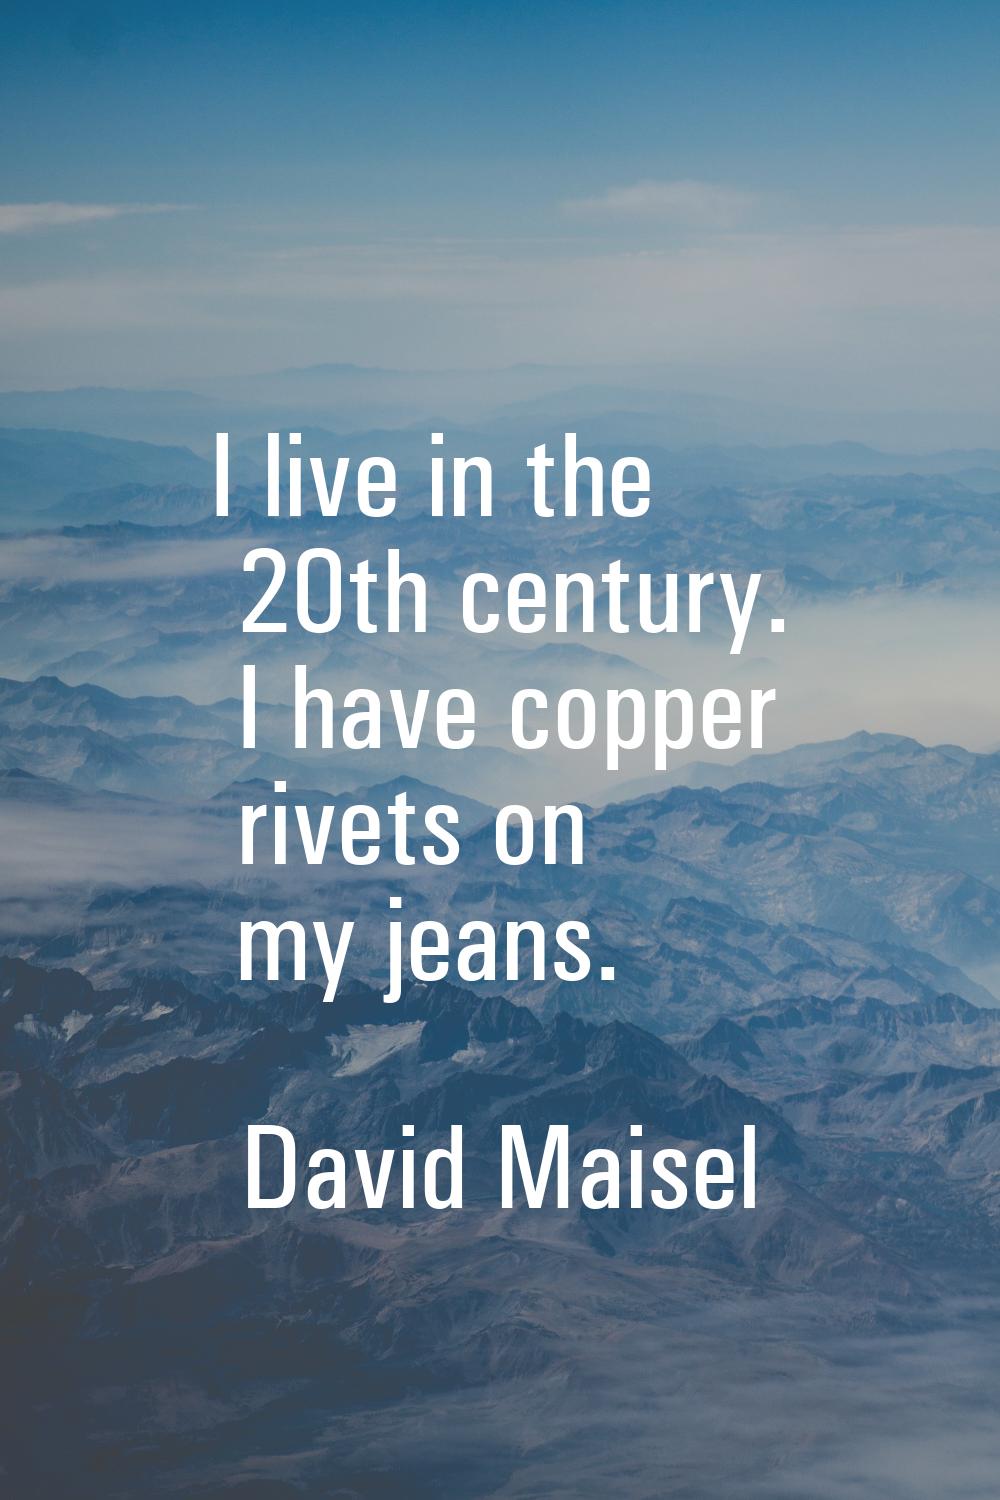 I live in the 20th century. I have copper rivets on my jeans.